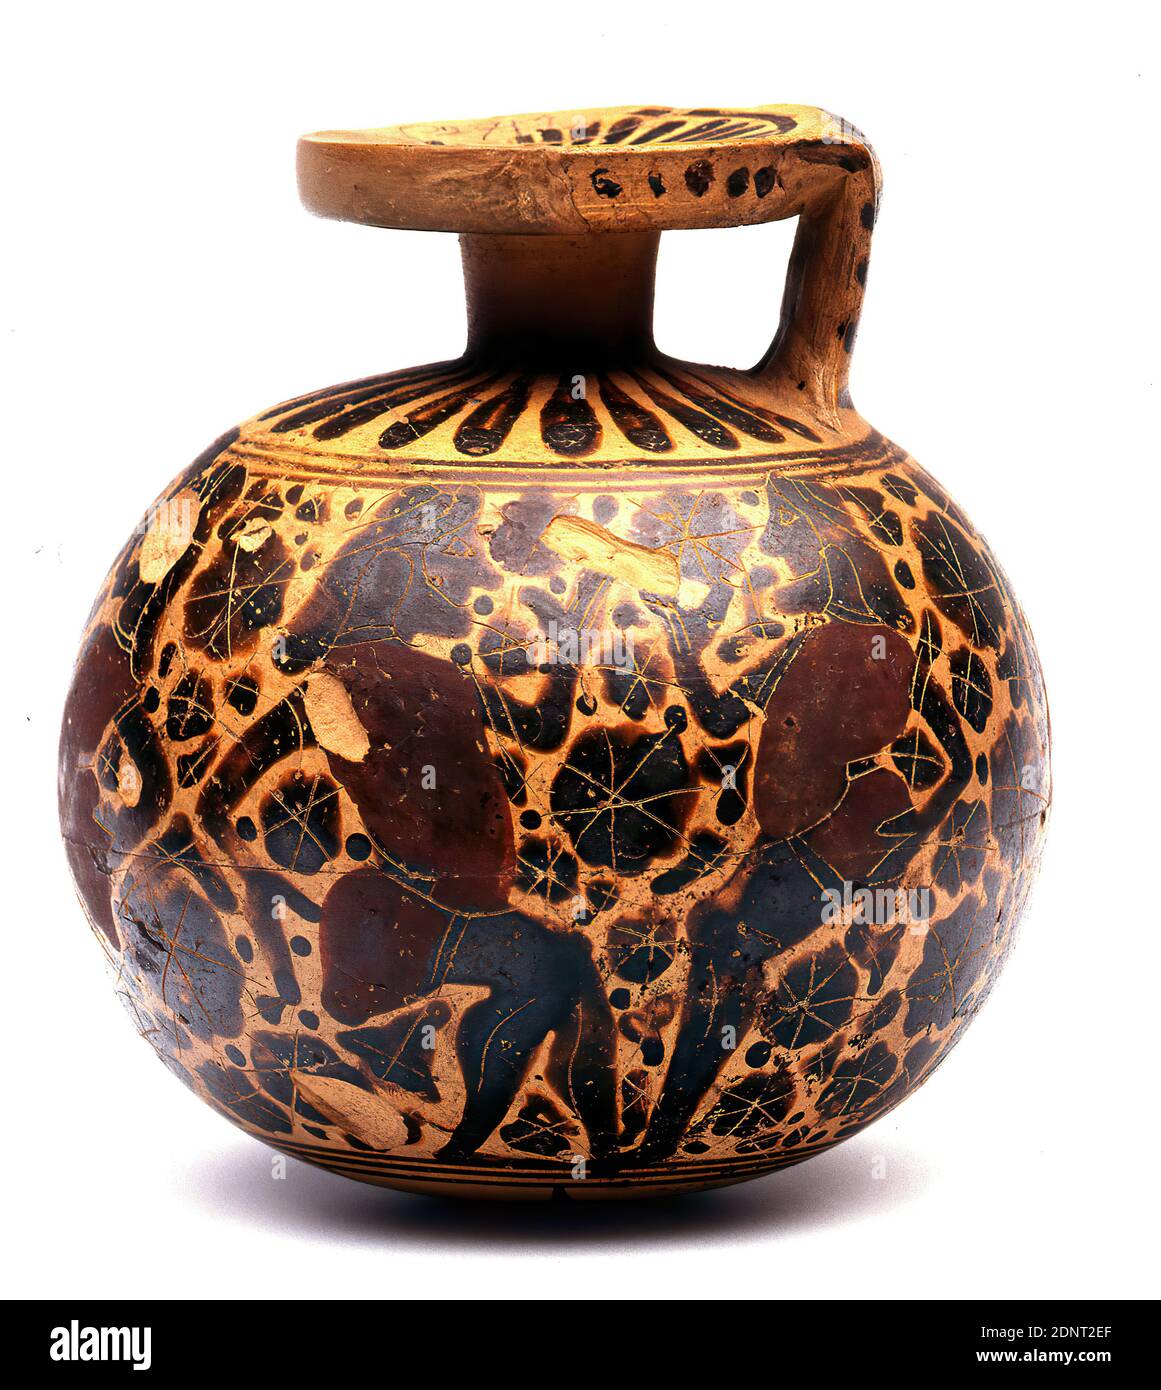 https://c8.alamy.com/comp/2DNT2EF/ballaryballos-pot-belly-dancers-formerly-ernest-brummer-collection-clay-disc-turned-painted-ceramic-fired-ceramic-total-height-106-cm-diameter-98-cm-muzzle-diameter-51-cm-ceramic-dancers-dance-at-festivities-ornaments-early-archaic-middle-archaic-greek-antiquity-the-shoulder-of-the-spherical-ointment-vessel-and-the-mouth-plate-are-painted-with-a-tongue-band-the-outside-of-the-handle-is-decorated-with-a-horizontal-row-of-sticks-the-base-on-the-other-hand-is-decorated-with-a-seven-pointed-star-2DNT2EF.jpg